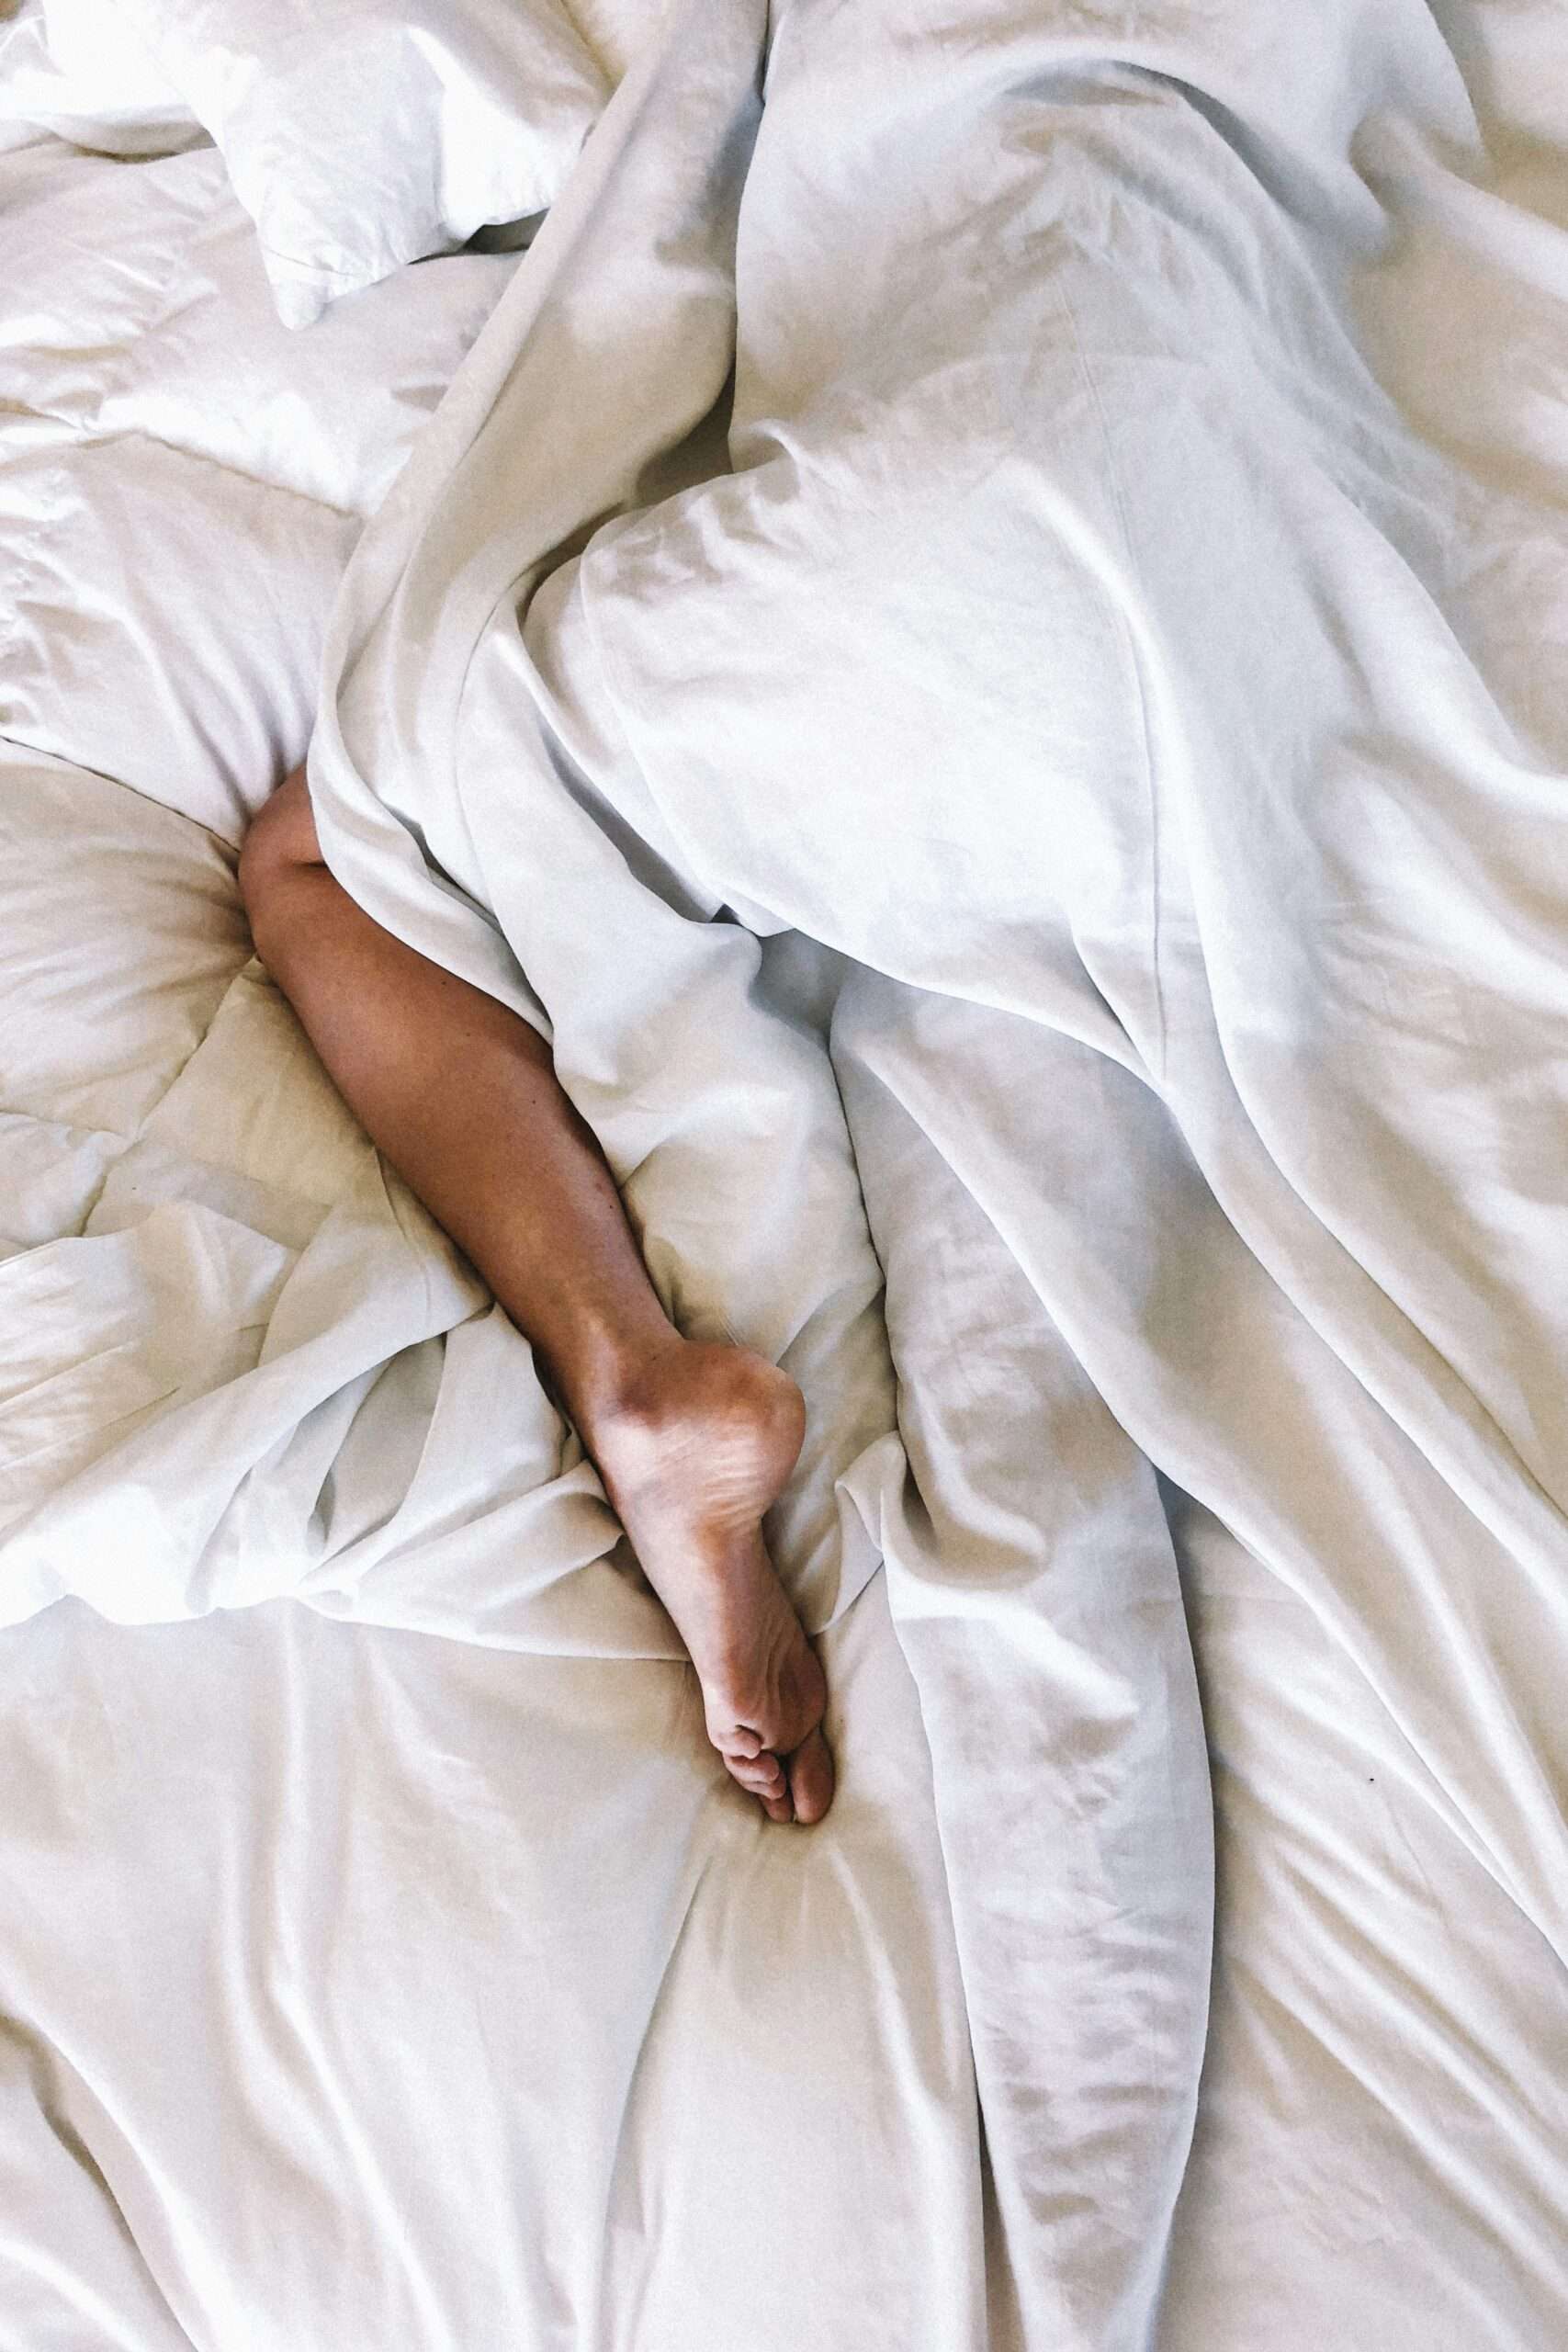 20 Proven Tips to Sleep Better at Night